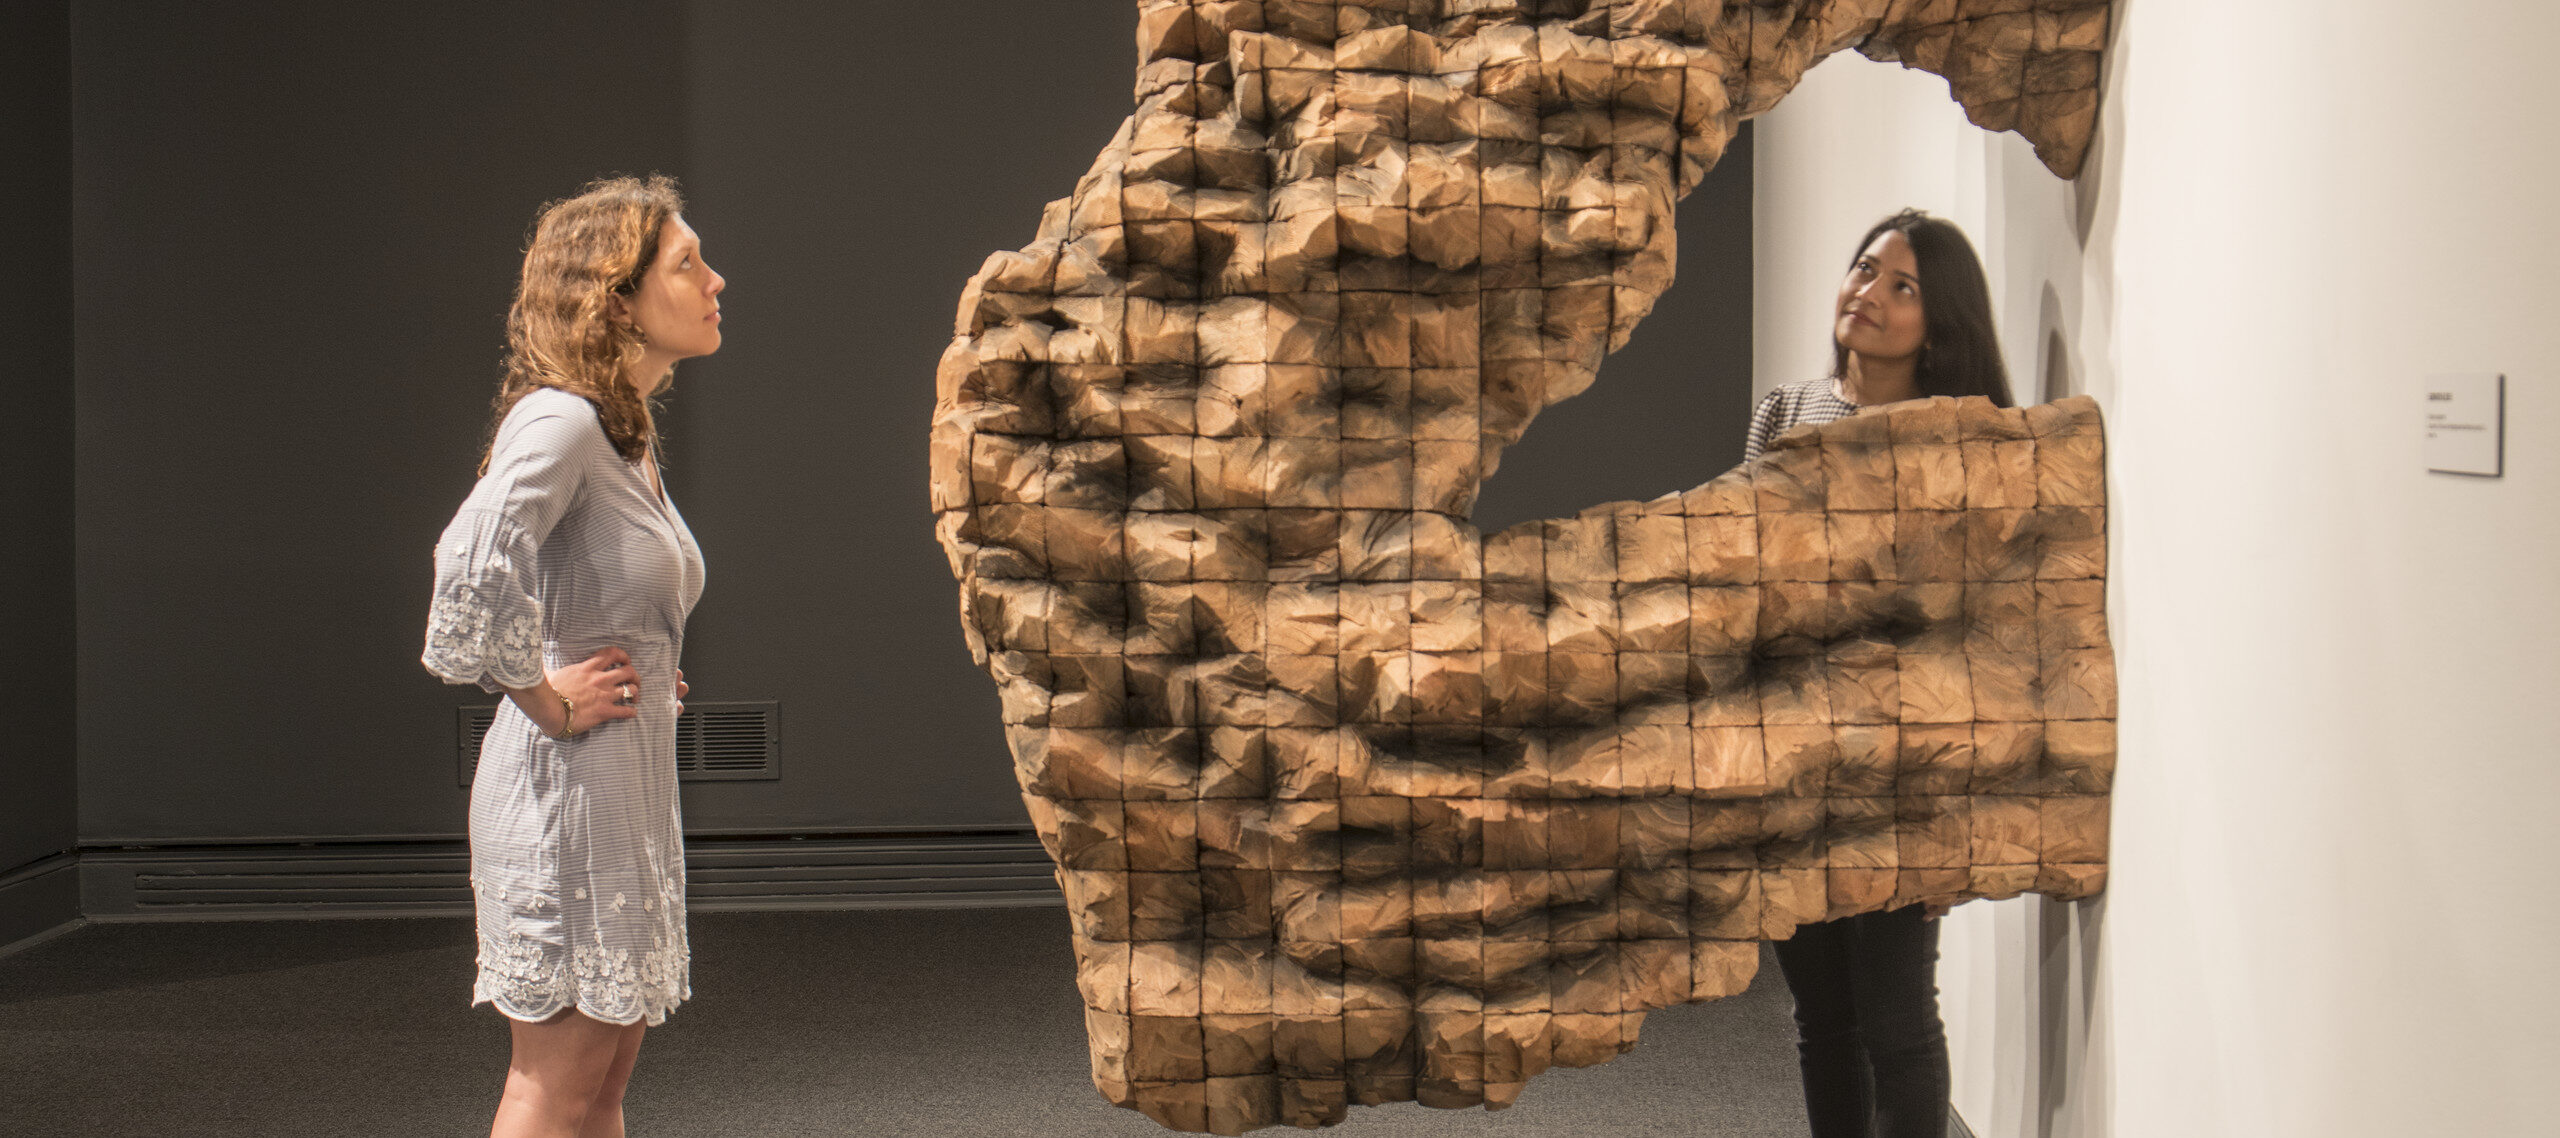 Two young adult women, one with light skin and one with medium-dark skin, gaze at a large cedar sculpture mounted to a wall. It bursts forward in a fluid, almost rippling arch away from the wall, as if defying gravity.